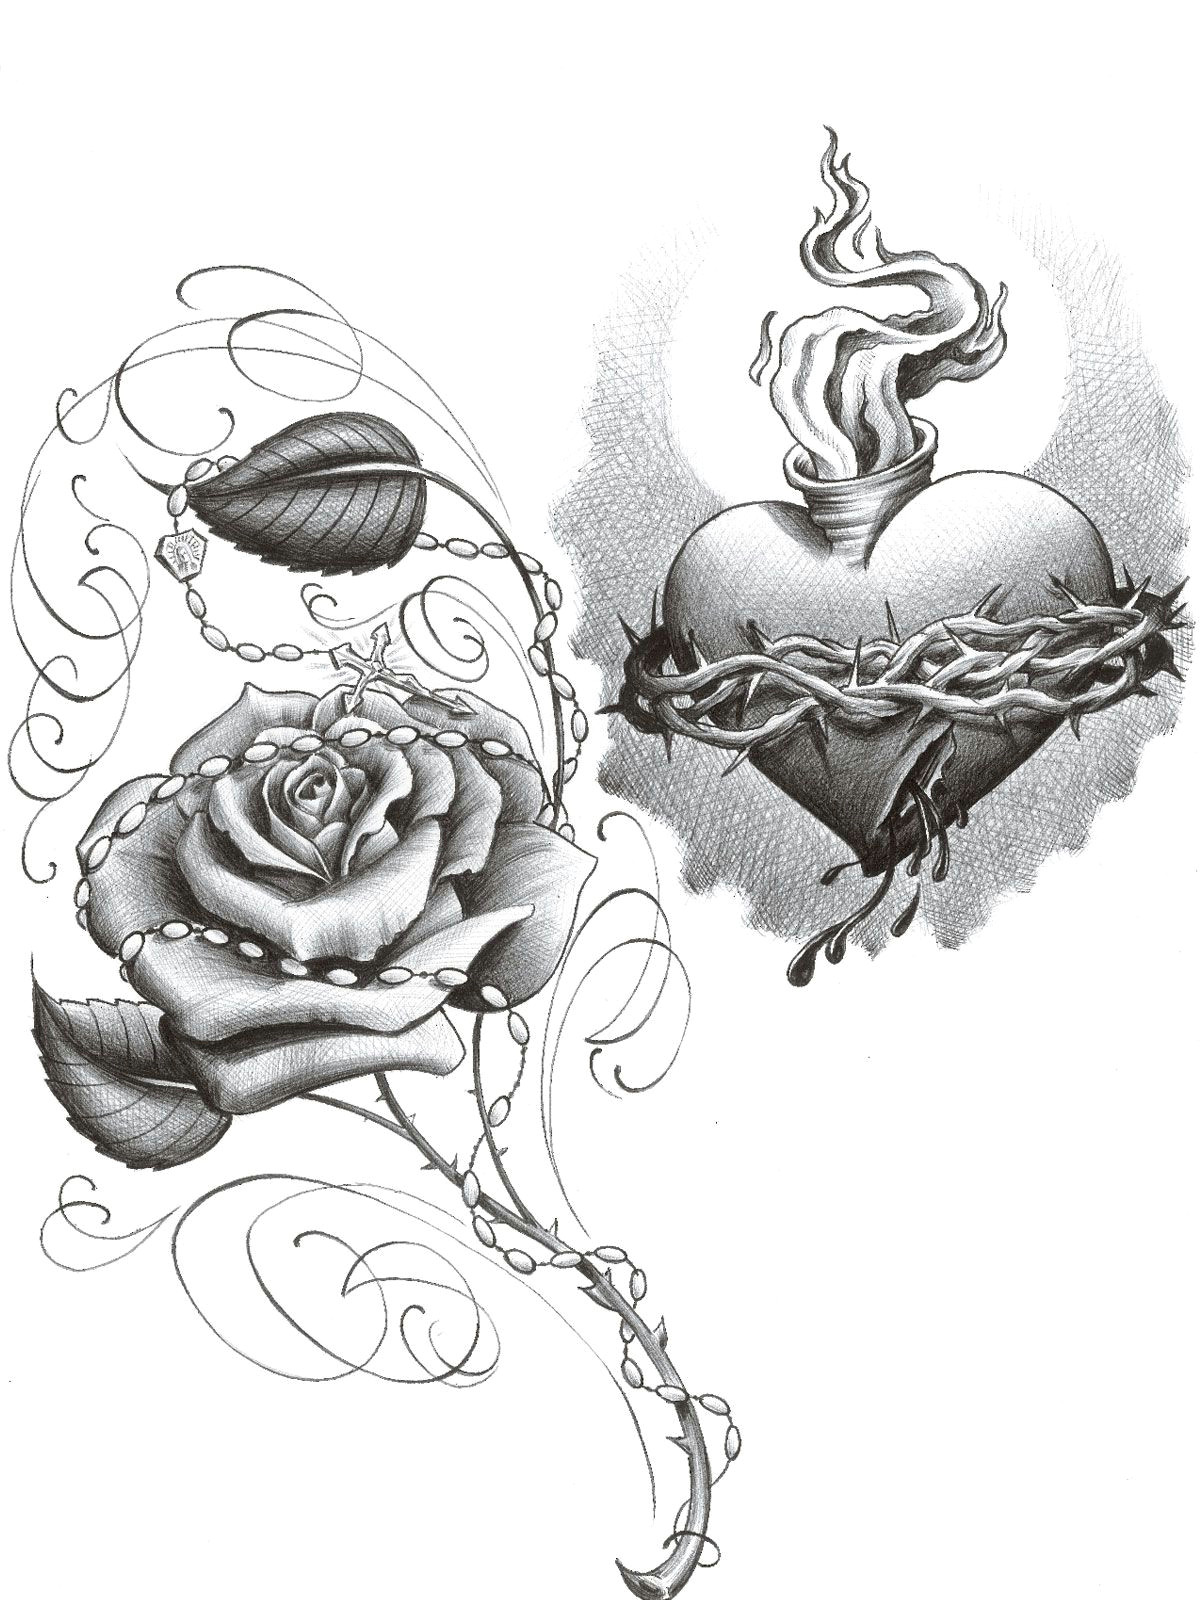 Drawing Of A Rose and Cross Lowrider Drawings Pictures Lowrider Art Image Lowrider Art